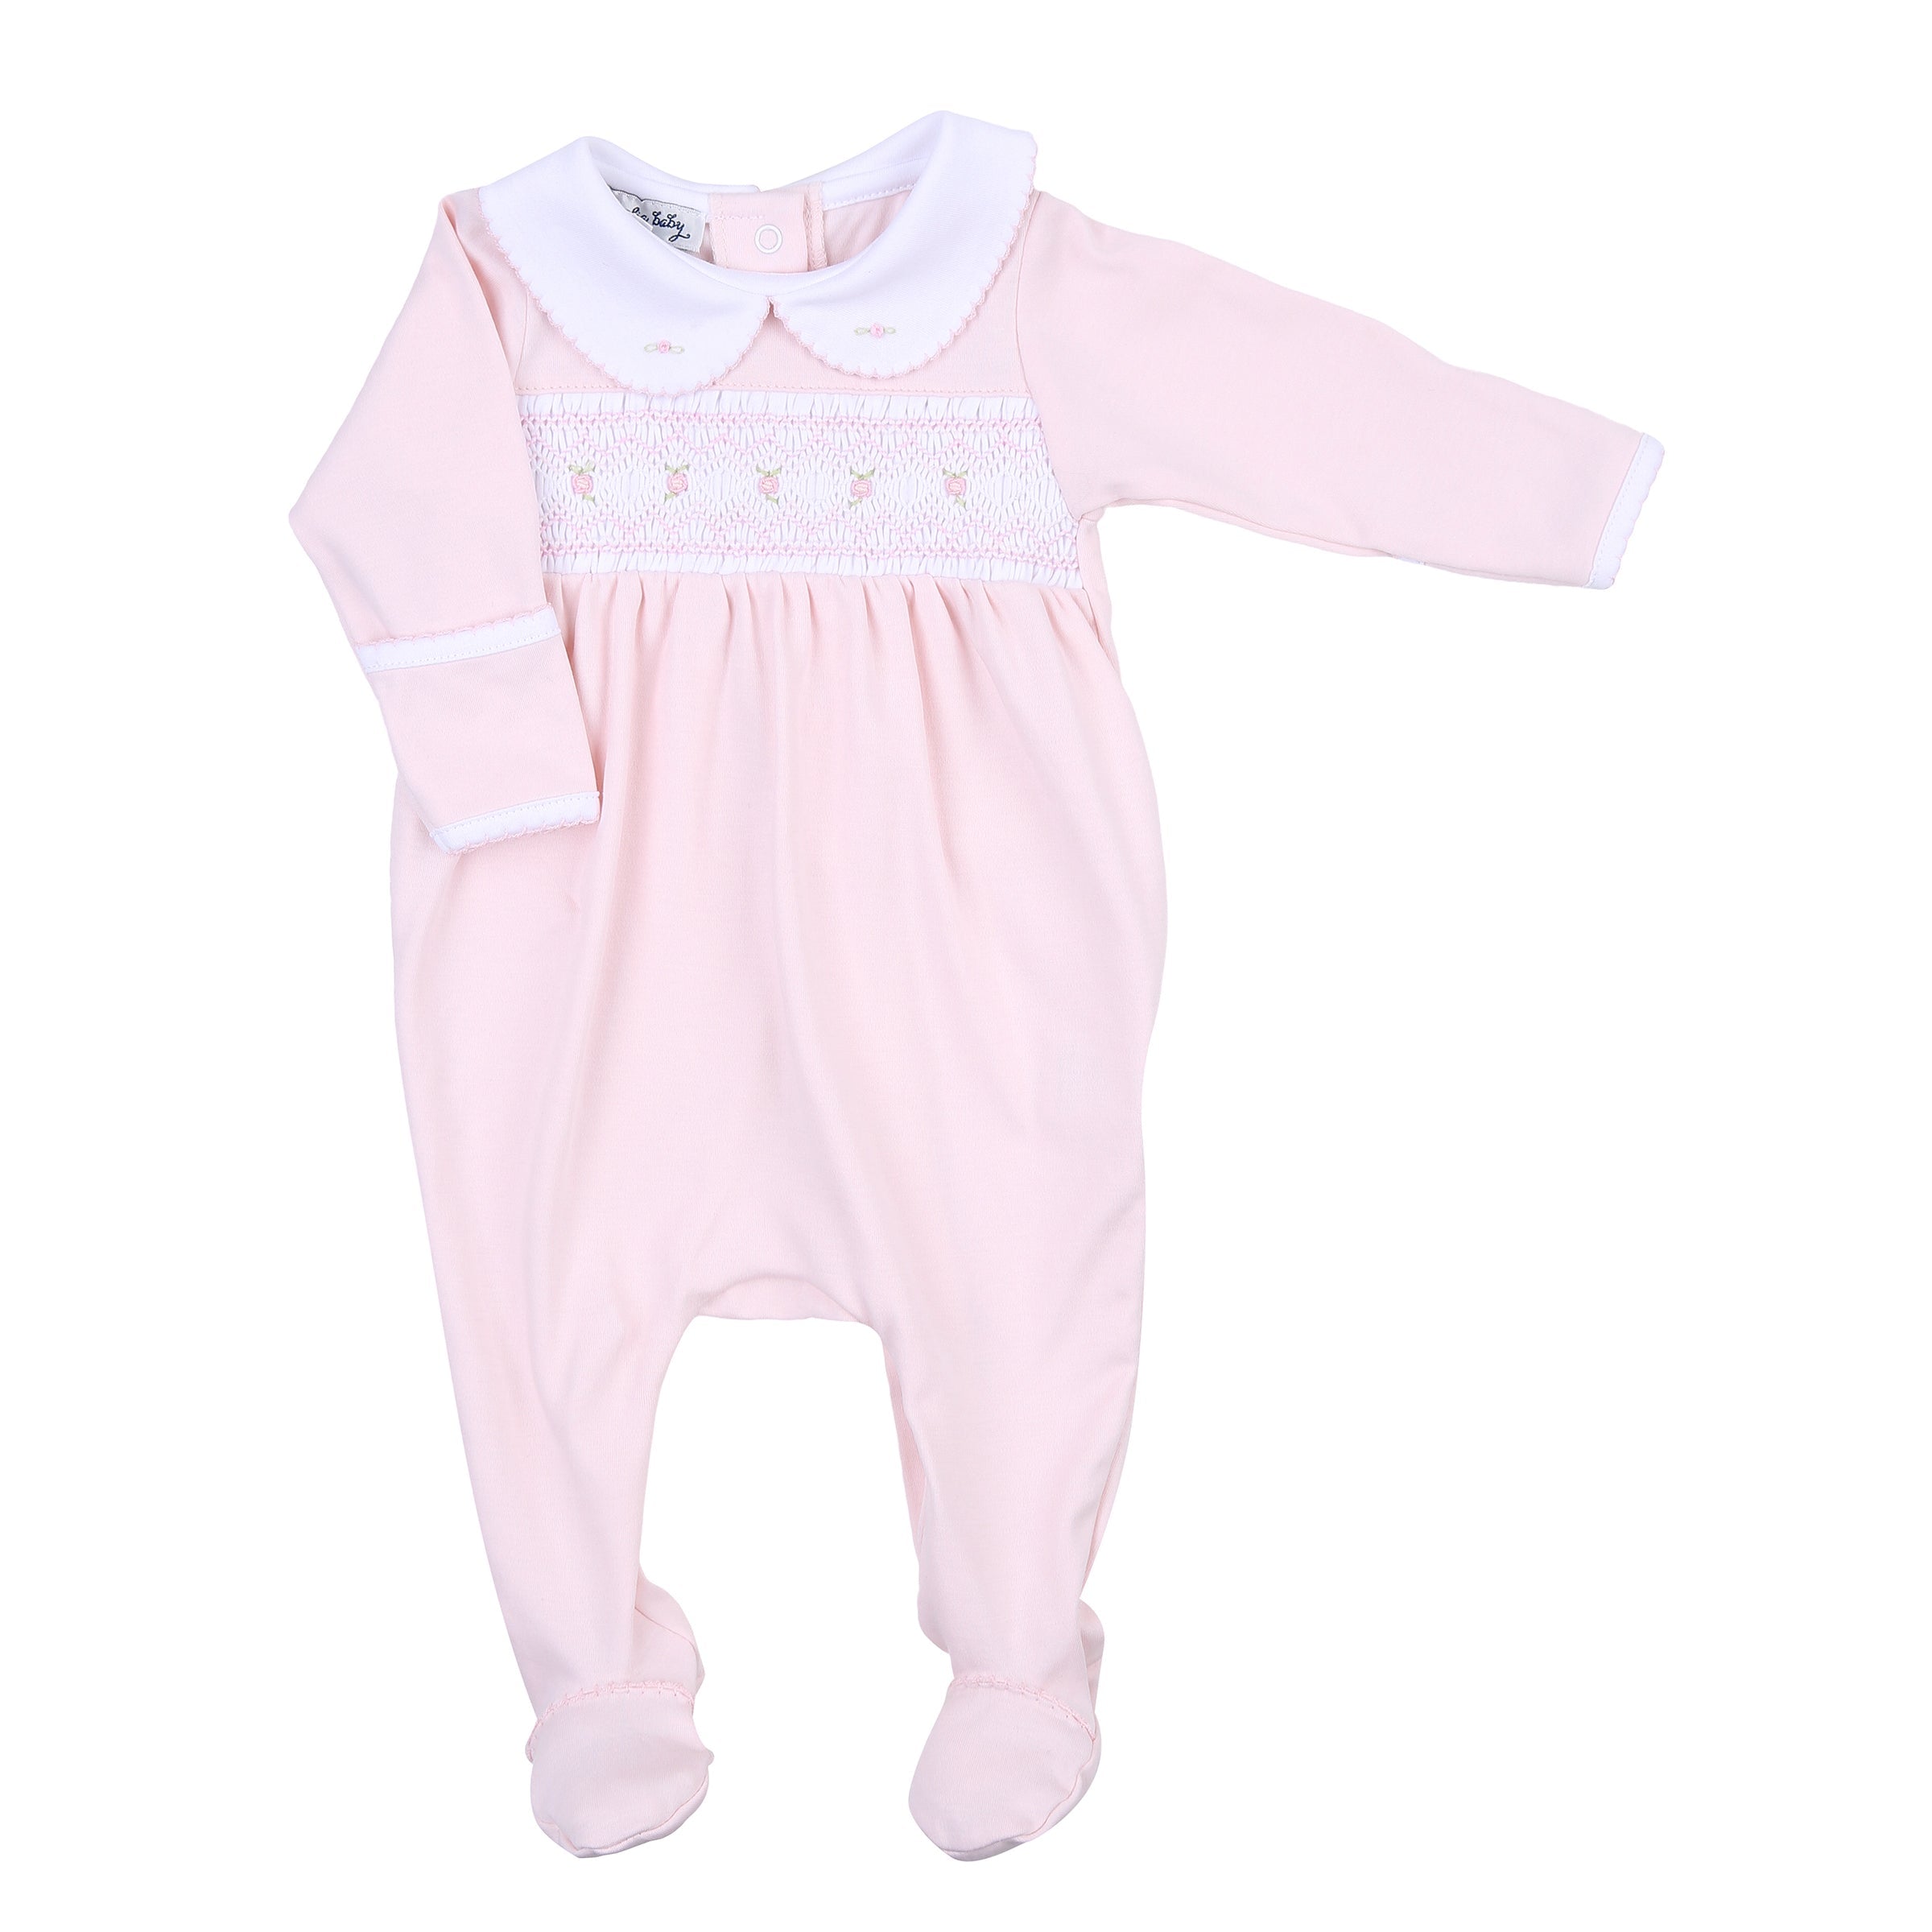 Fiona & Phillip Smocked Collared Footie - Pink